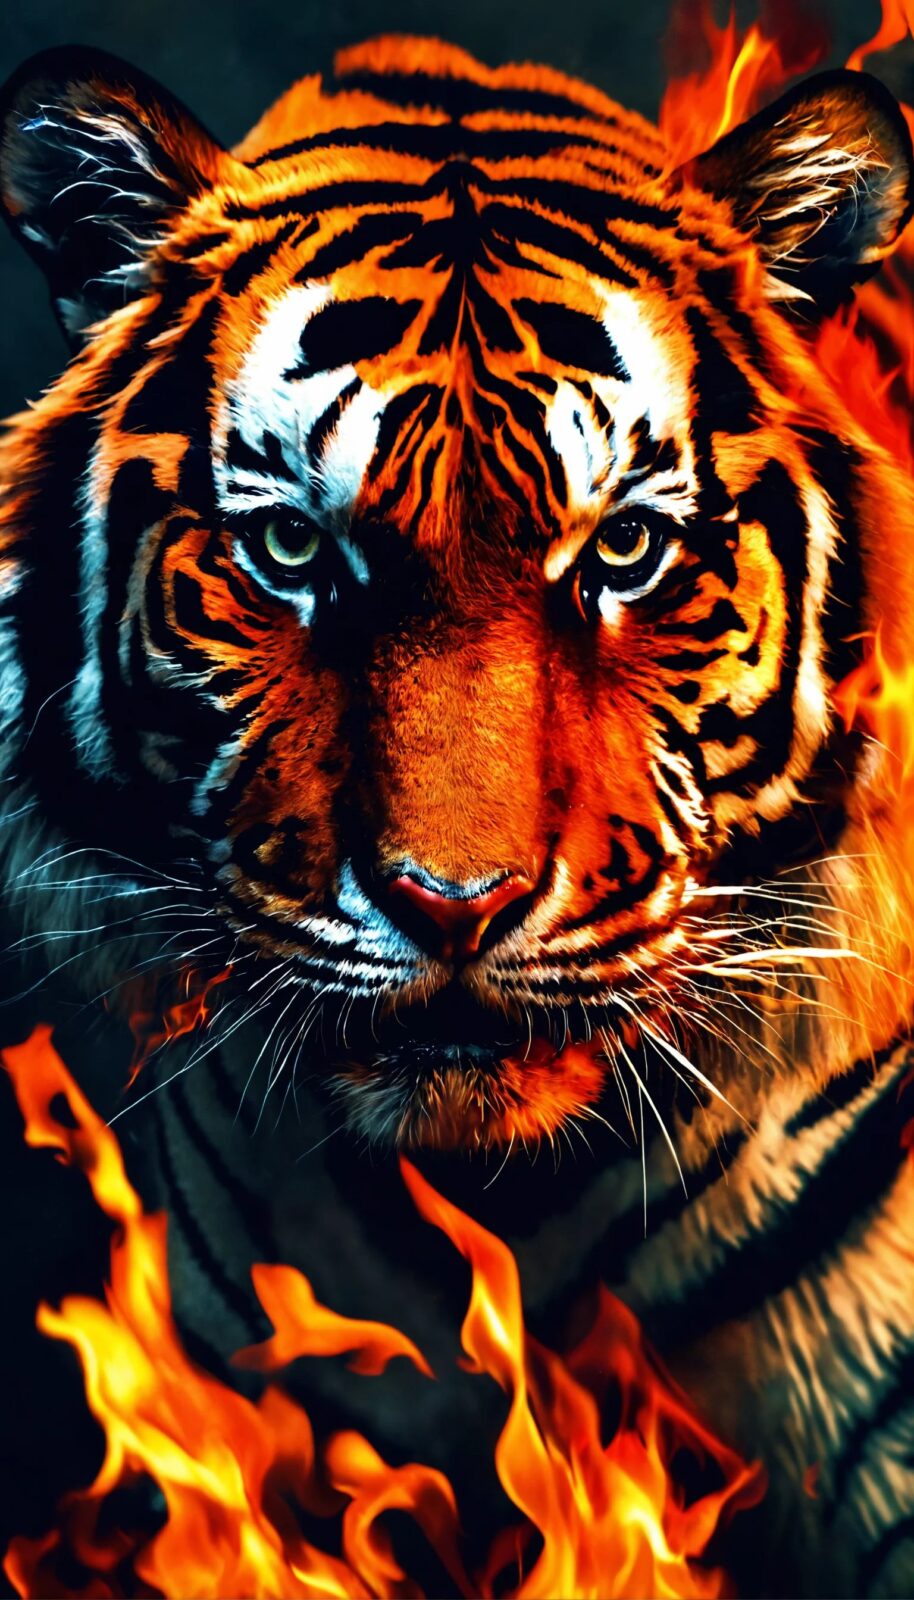 Tiger on Fire iPhone Wallpaper 4K | Free Download